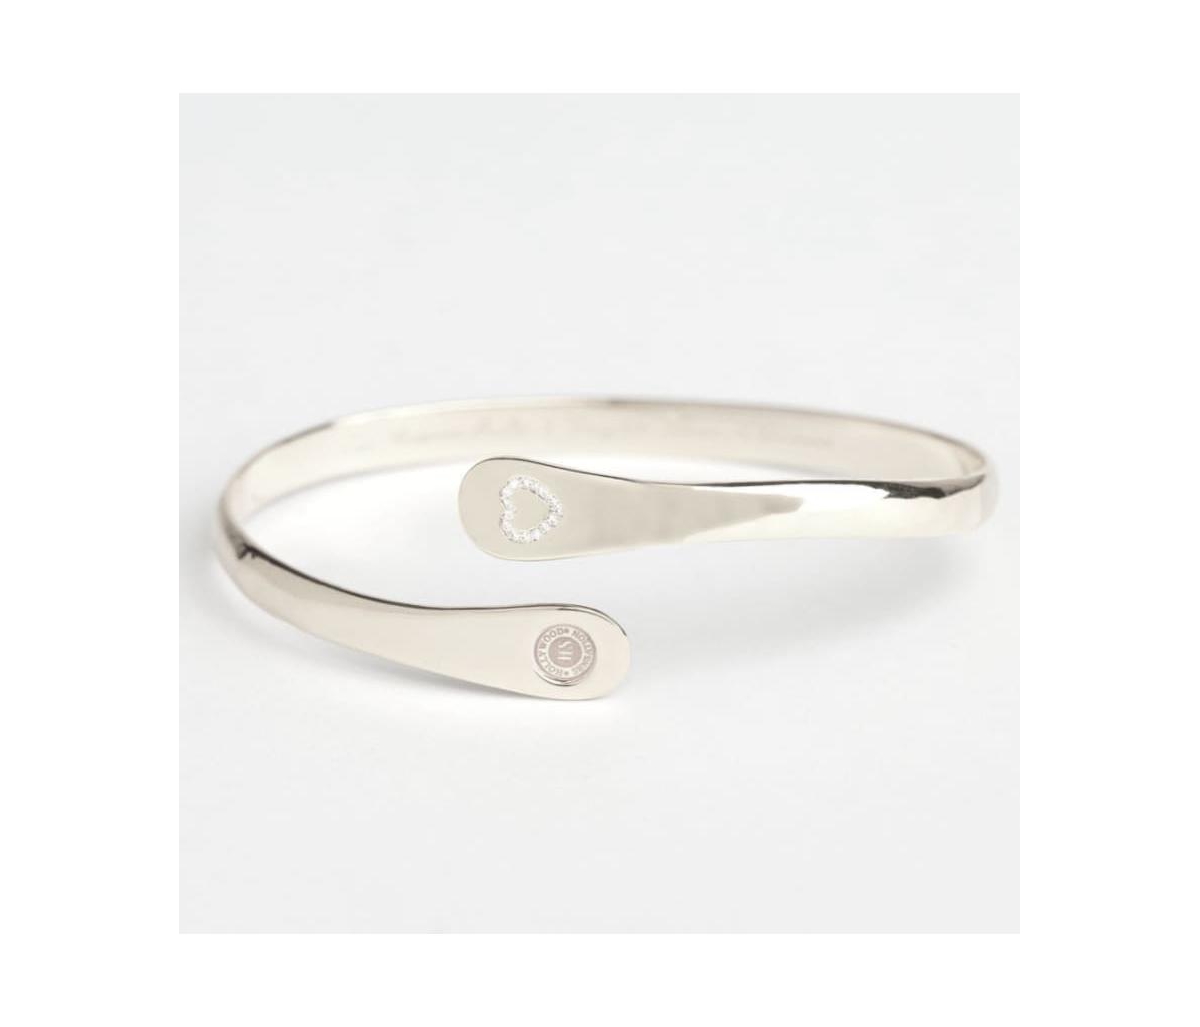 Engraved Love Between Mother and Daughter Knows No Distance Bracelet - Silver